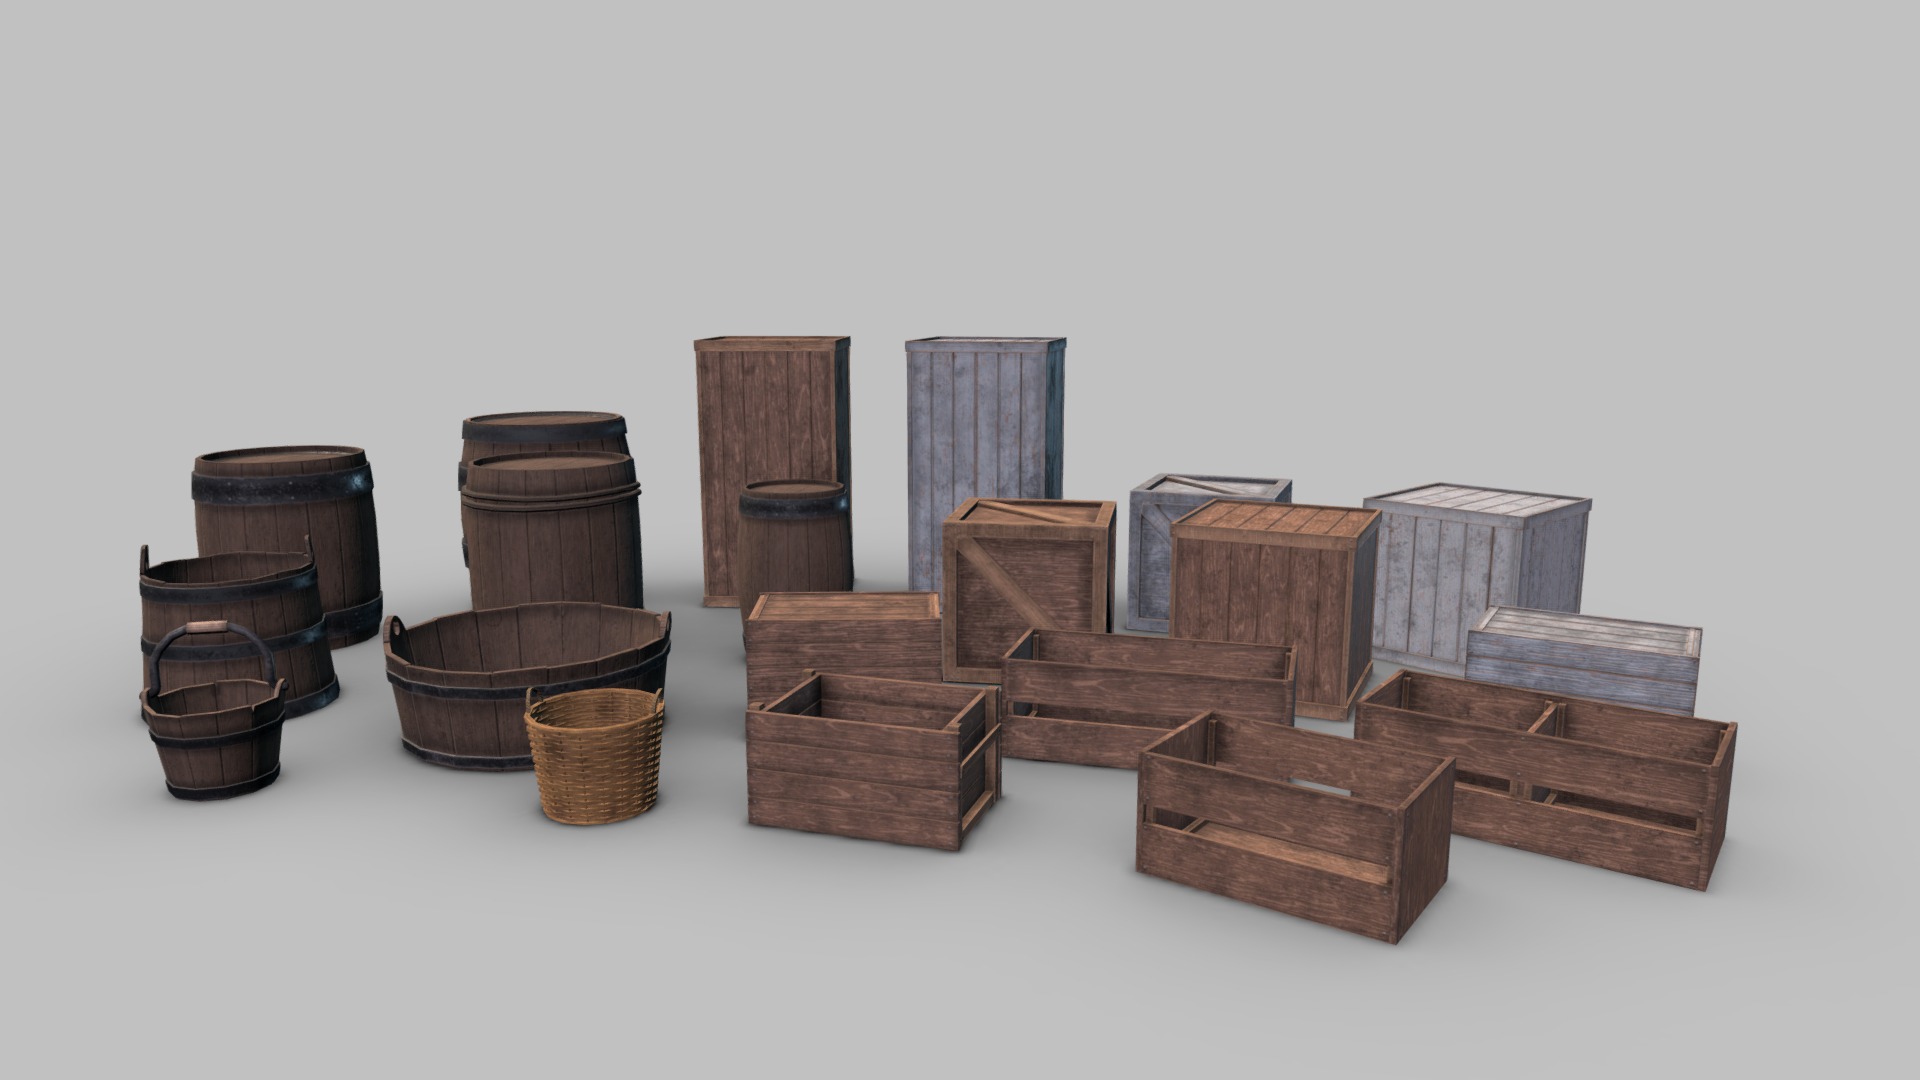 3D model wooden medieval props – storage - This is a 3D model of the wooden medieval props - storage. The 3D model is about a group of wooden barrels.